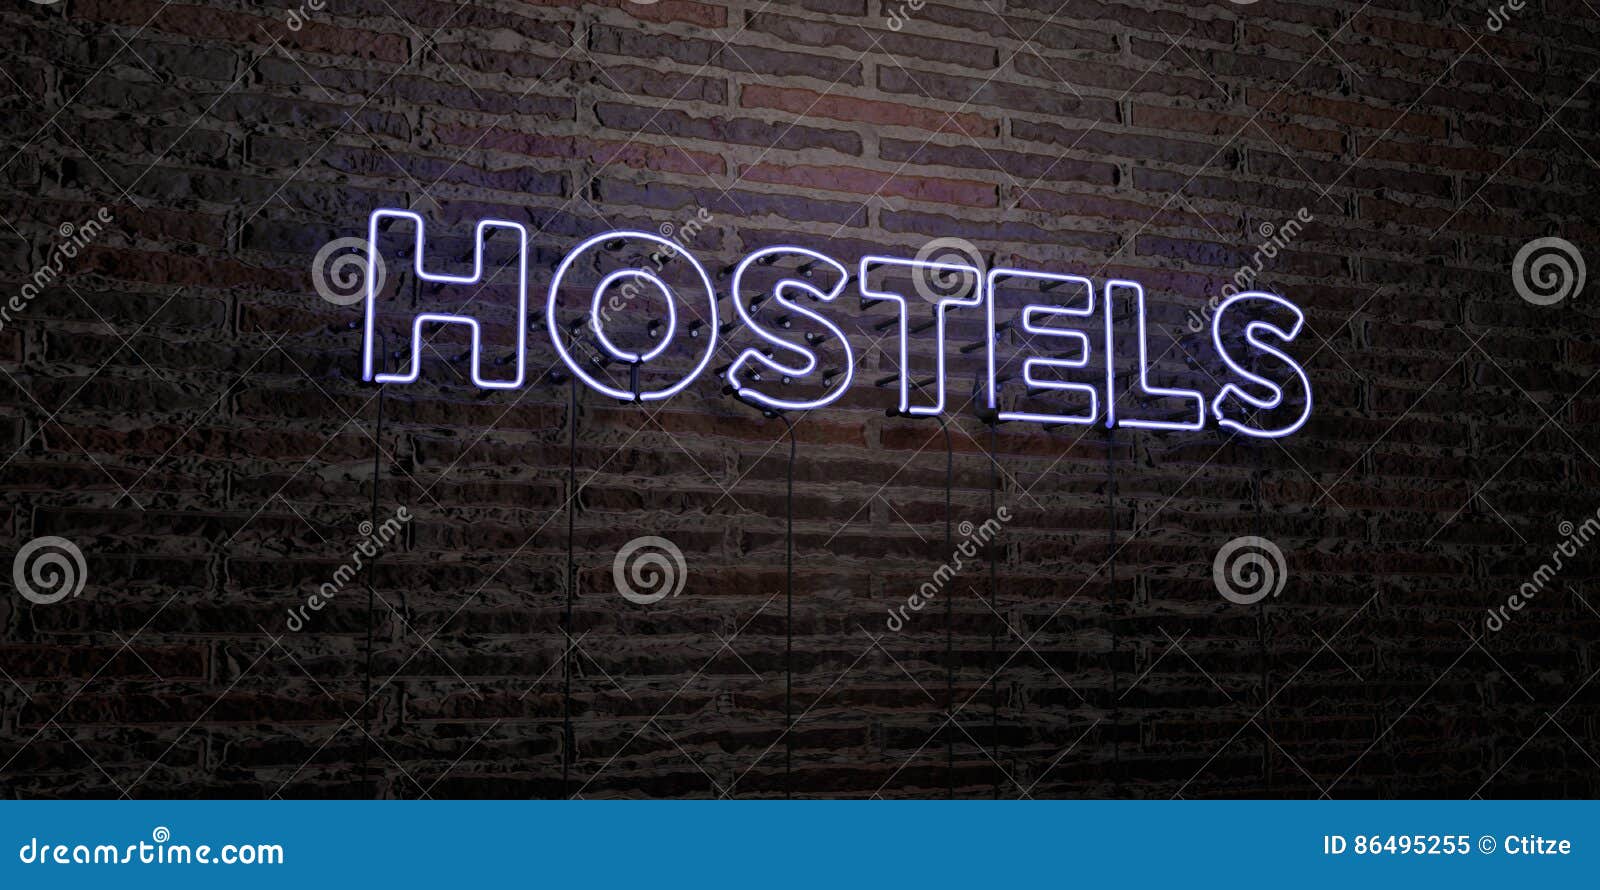 hostels -realistic neon sign on brick wall background - 3d rendered royalty free stock image